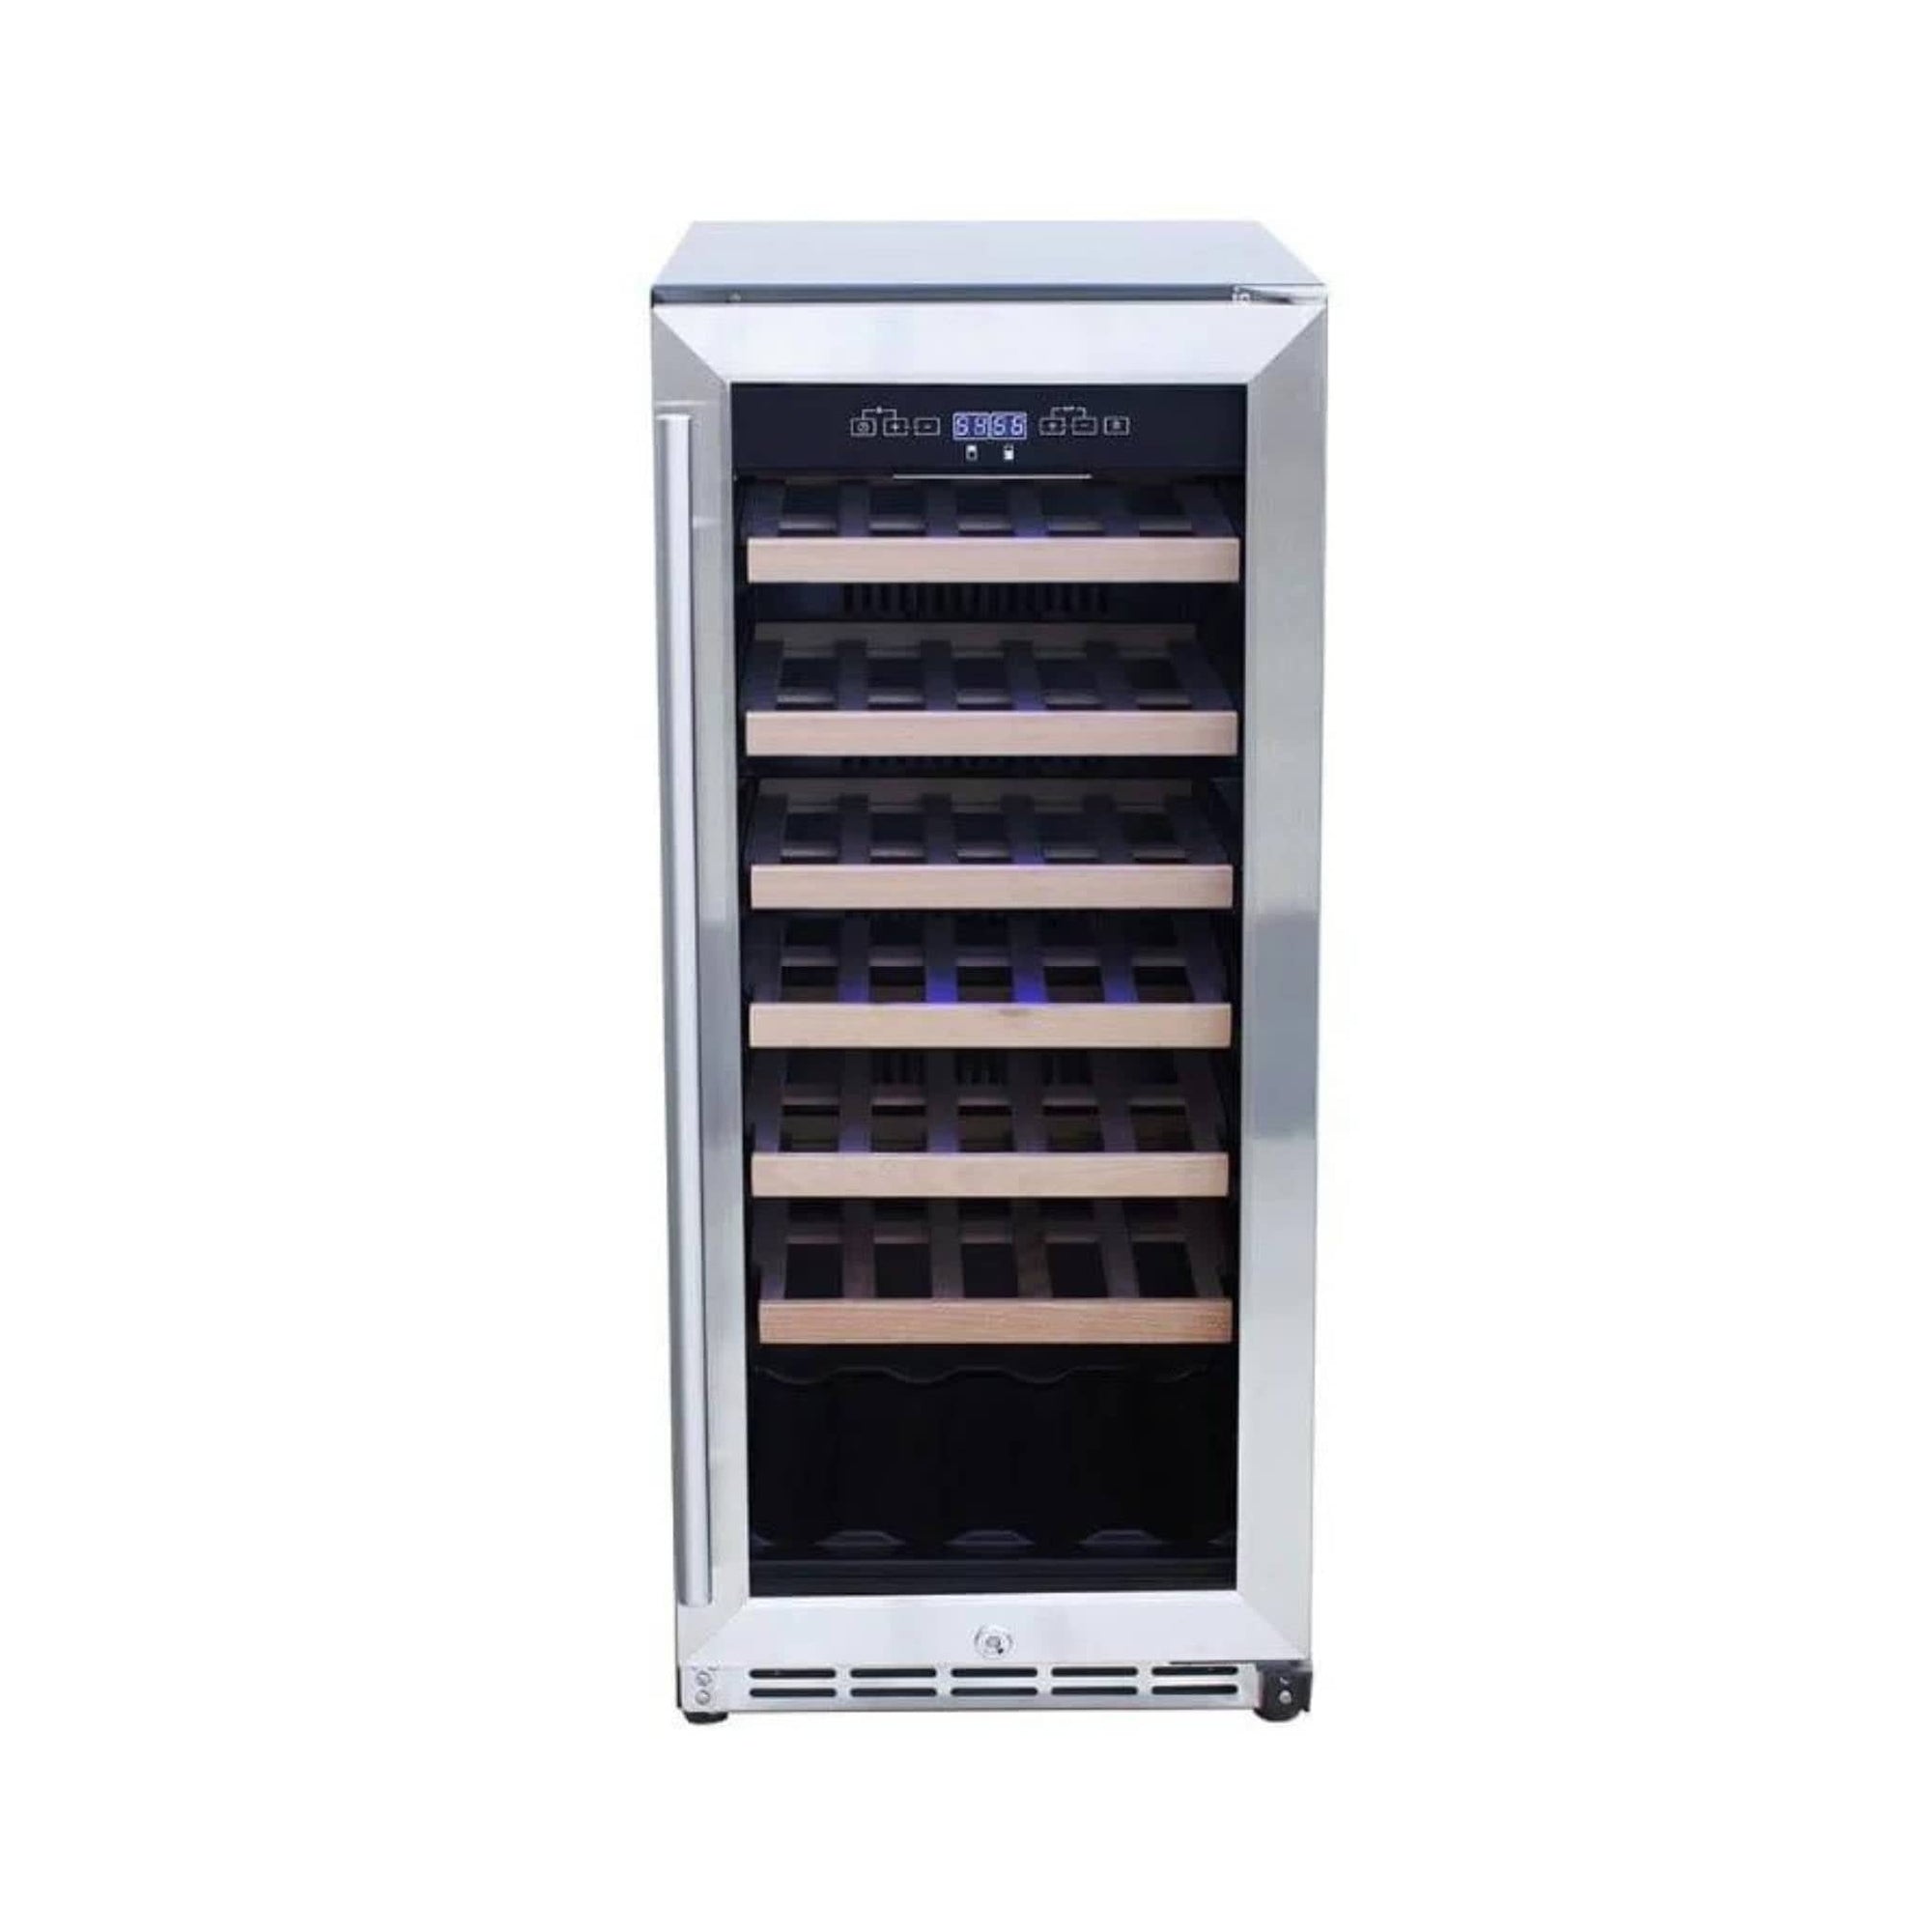 Summerset 15" Outdoor Rated Wine Cooler - Culinary Hardware